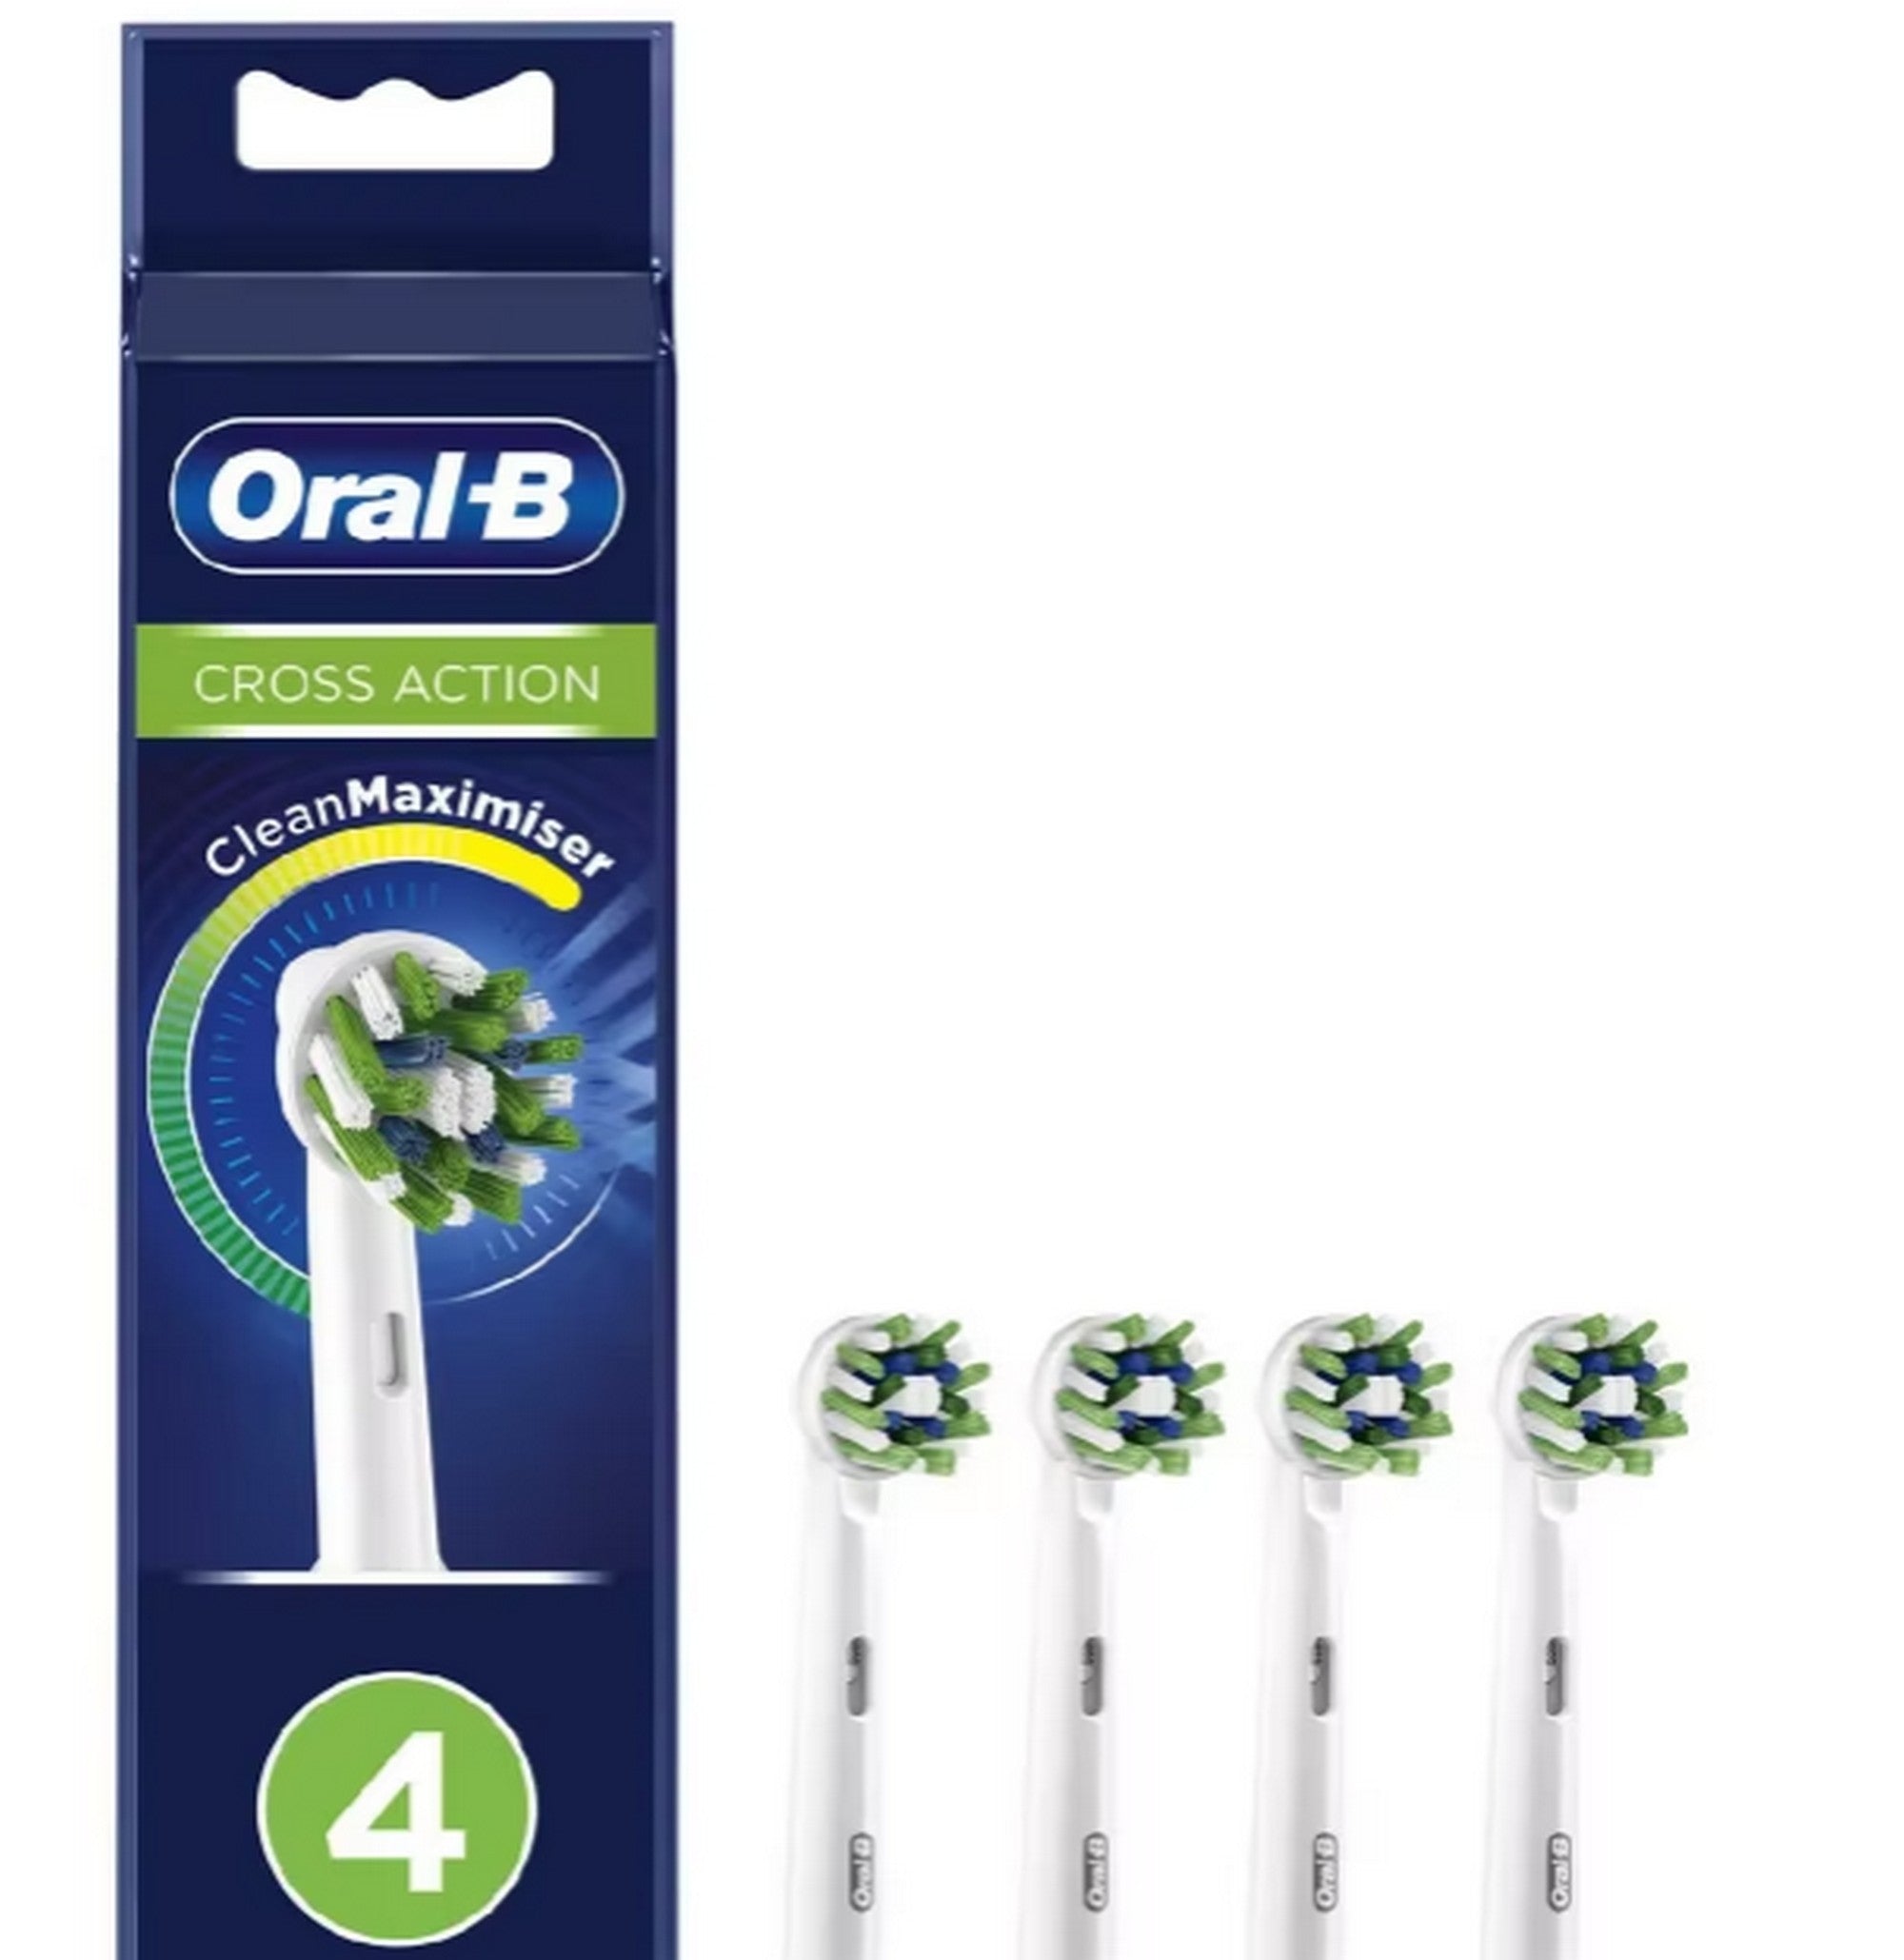 ORAL B CROSS ACTION REFILL HEADS 4 PACK